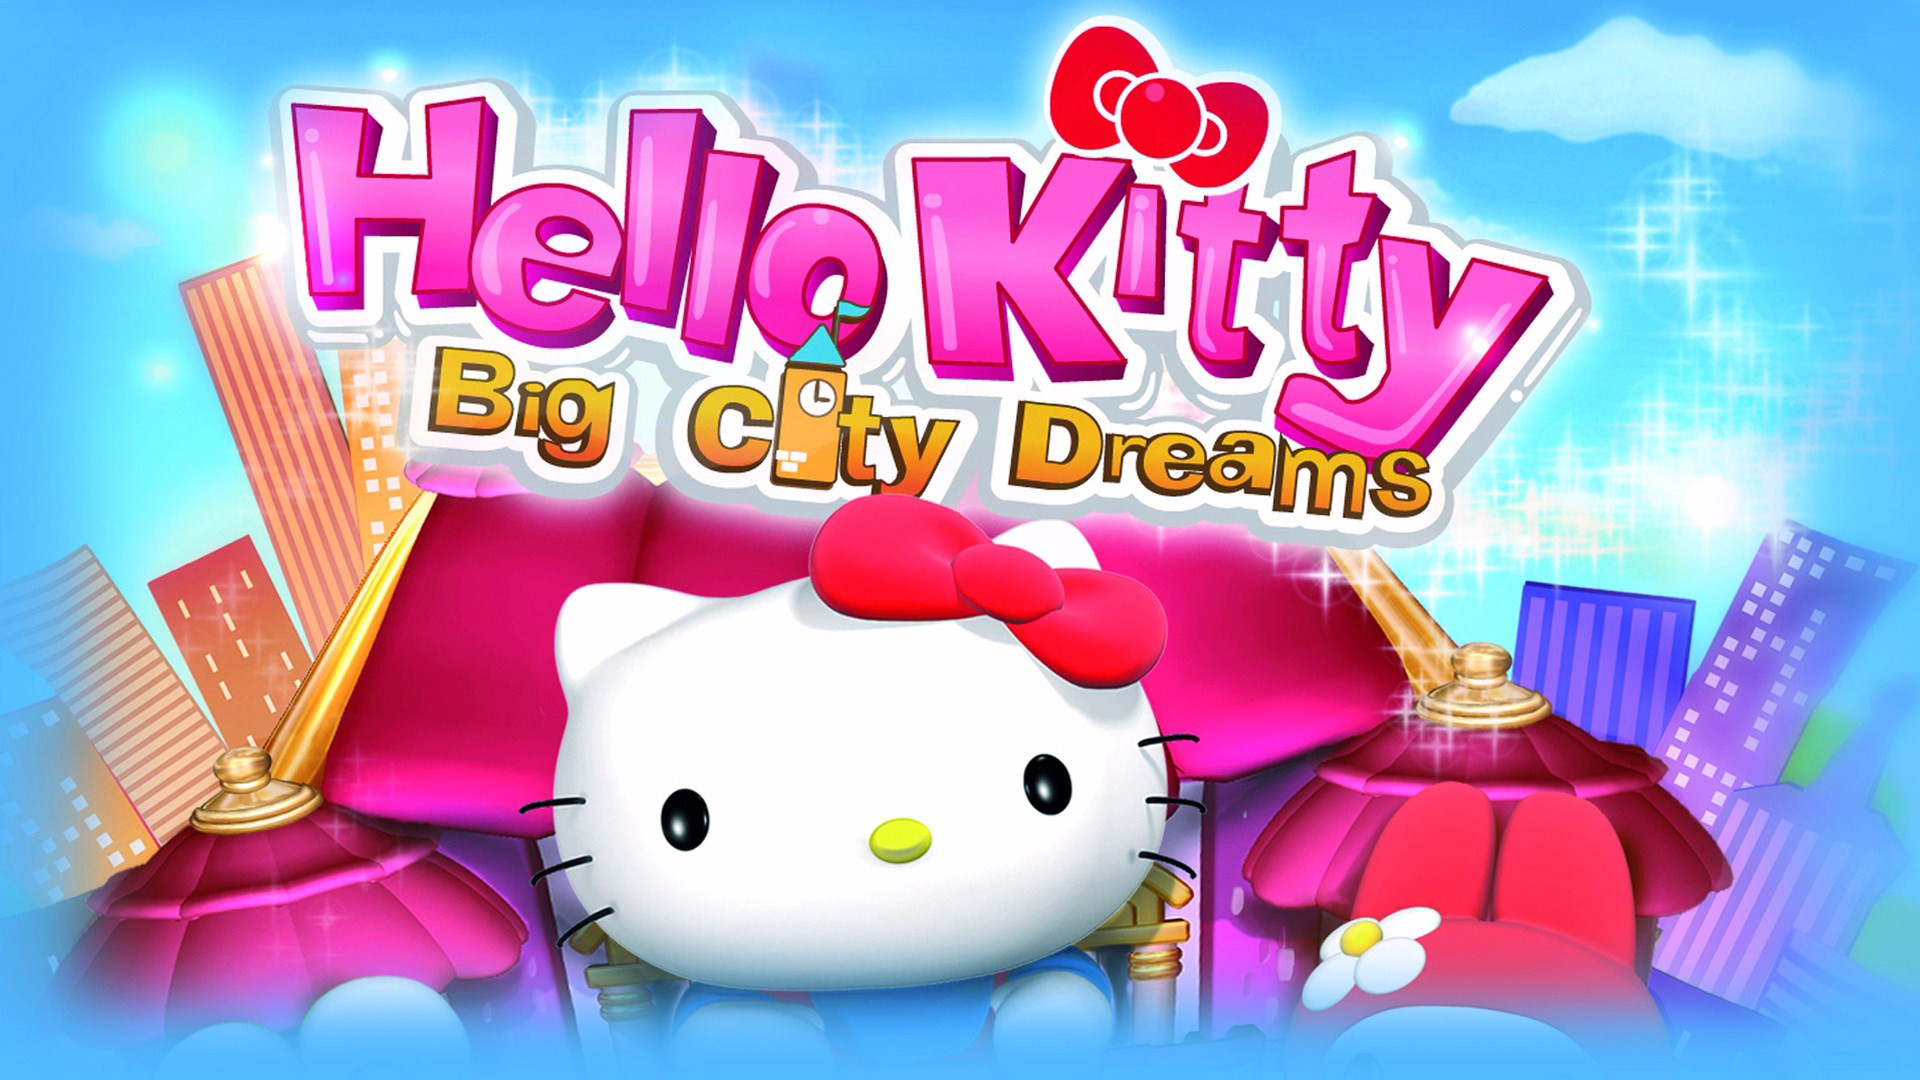 1920x1080 free hello kitty hd backgrounds download high definiton wallpapers desktop  images windows 10 backgrounds colourful free quality images cool best  1920Ã1080 ...